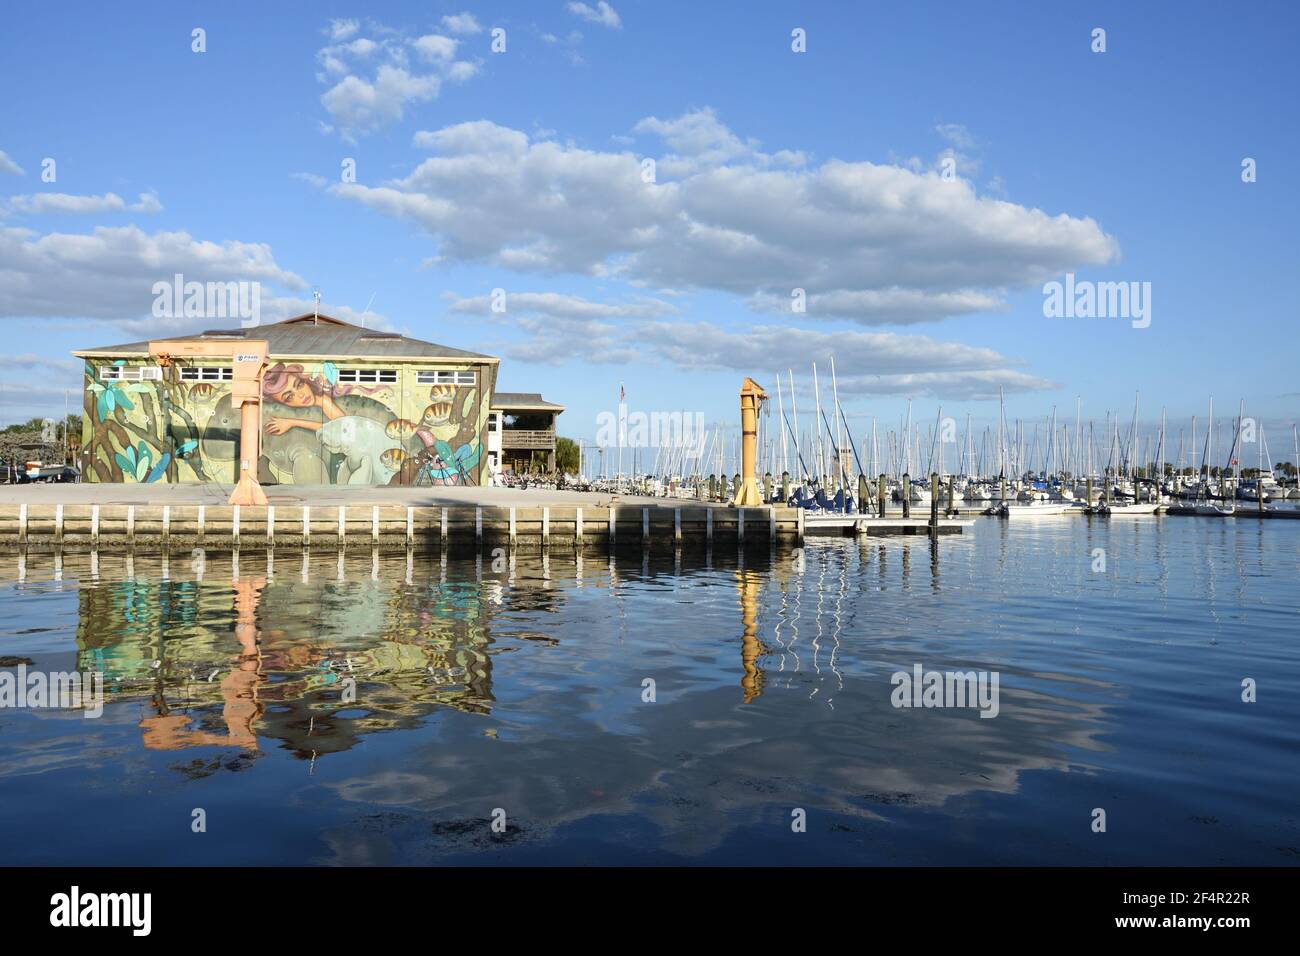 Water reflection of the sailboats and building with mural on the wall on a cloudy but sunny day near St. Pete pier. St. Petersburg, Florida, USA Stock Photo